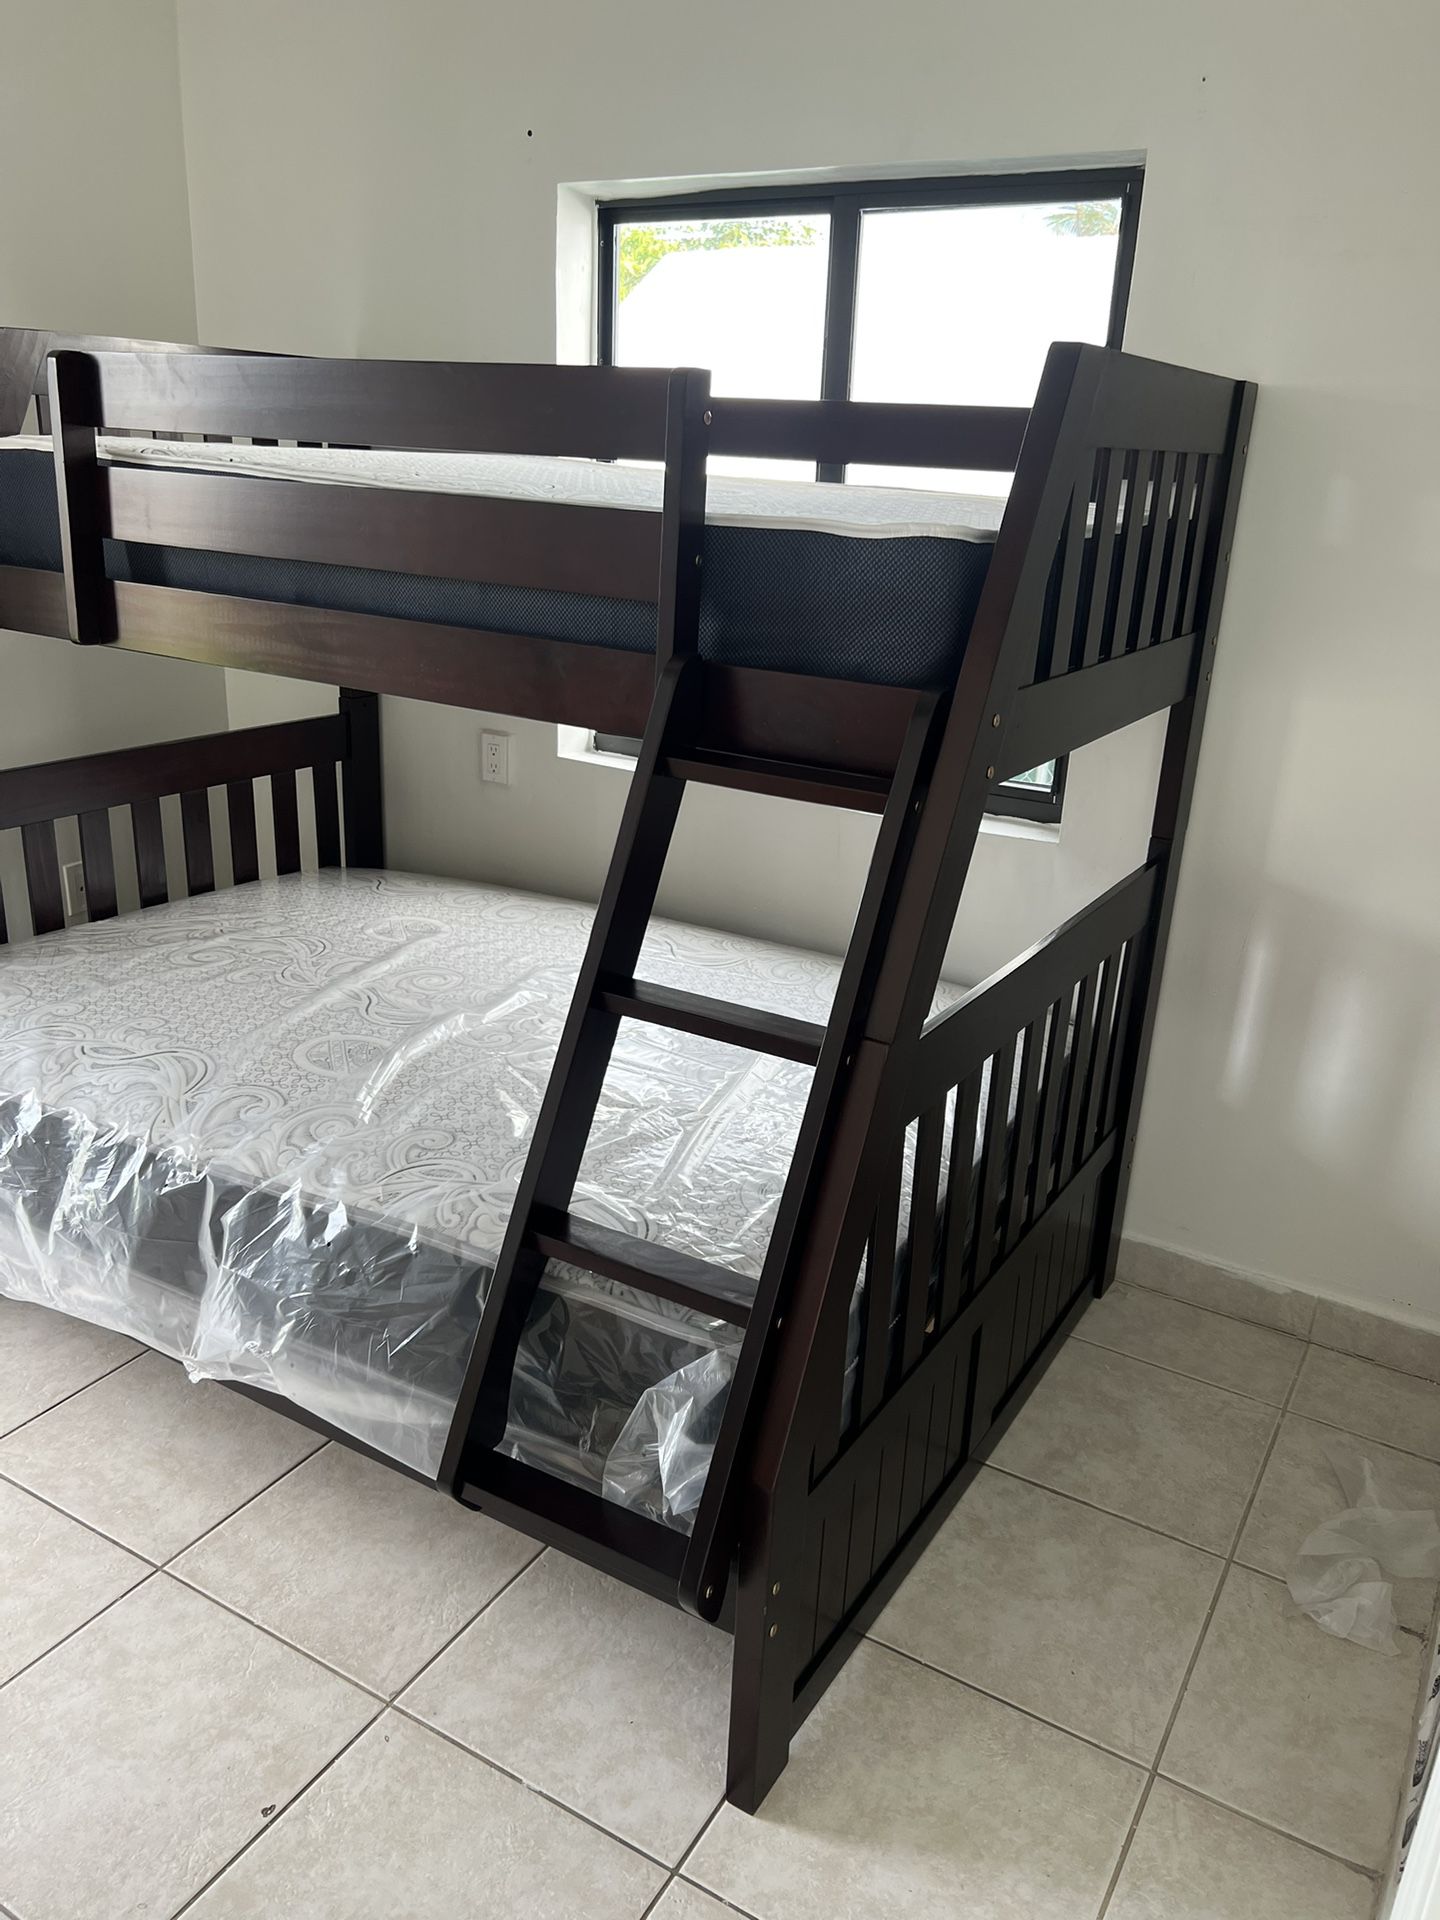 Twin over full bunk beds frame and free delivery in box with the mattress and